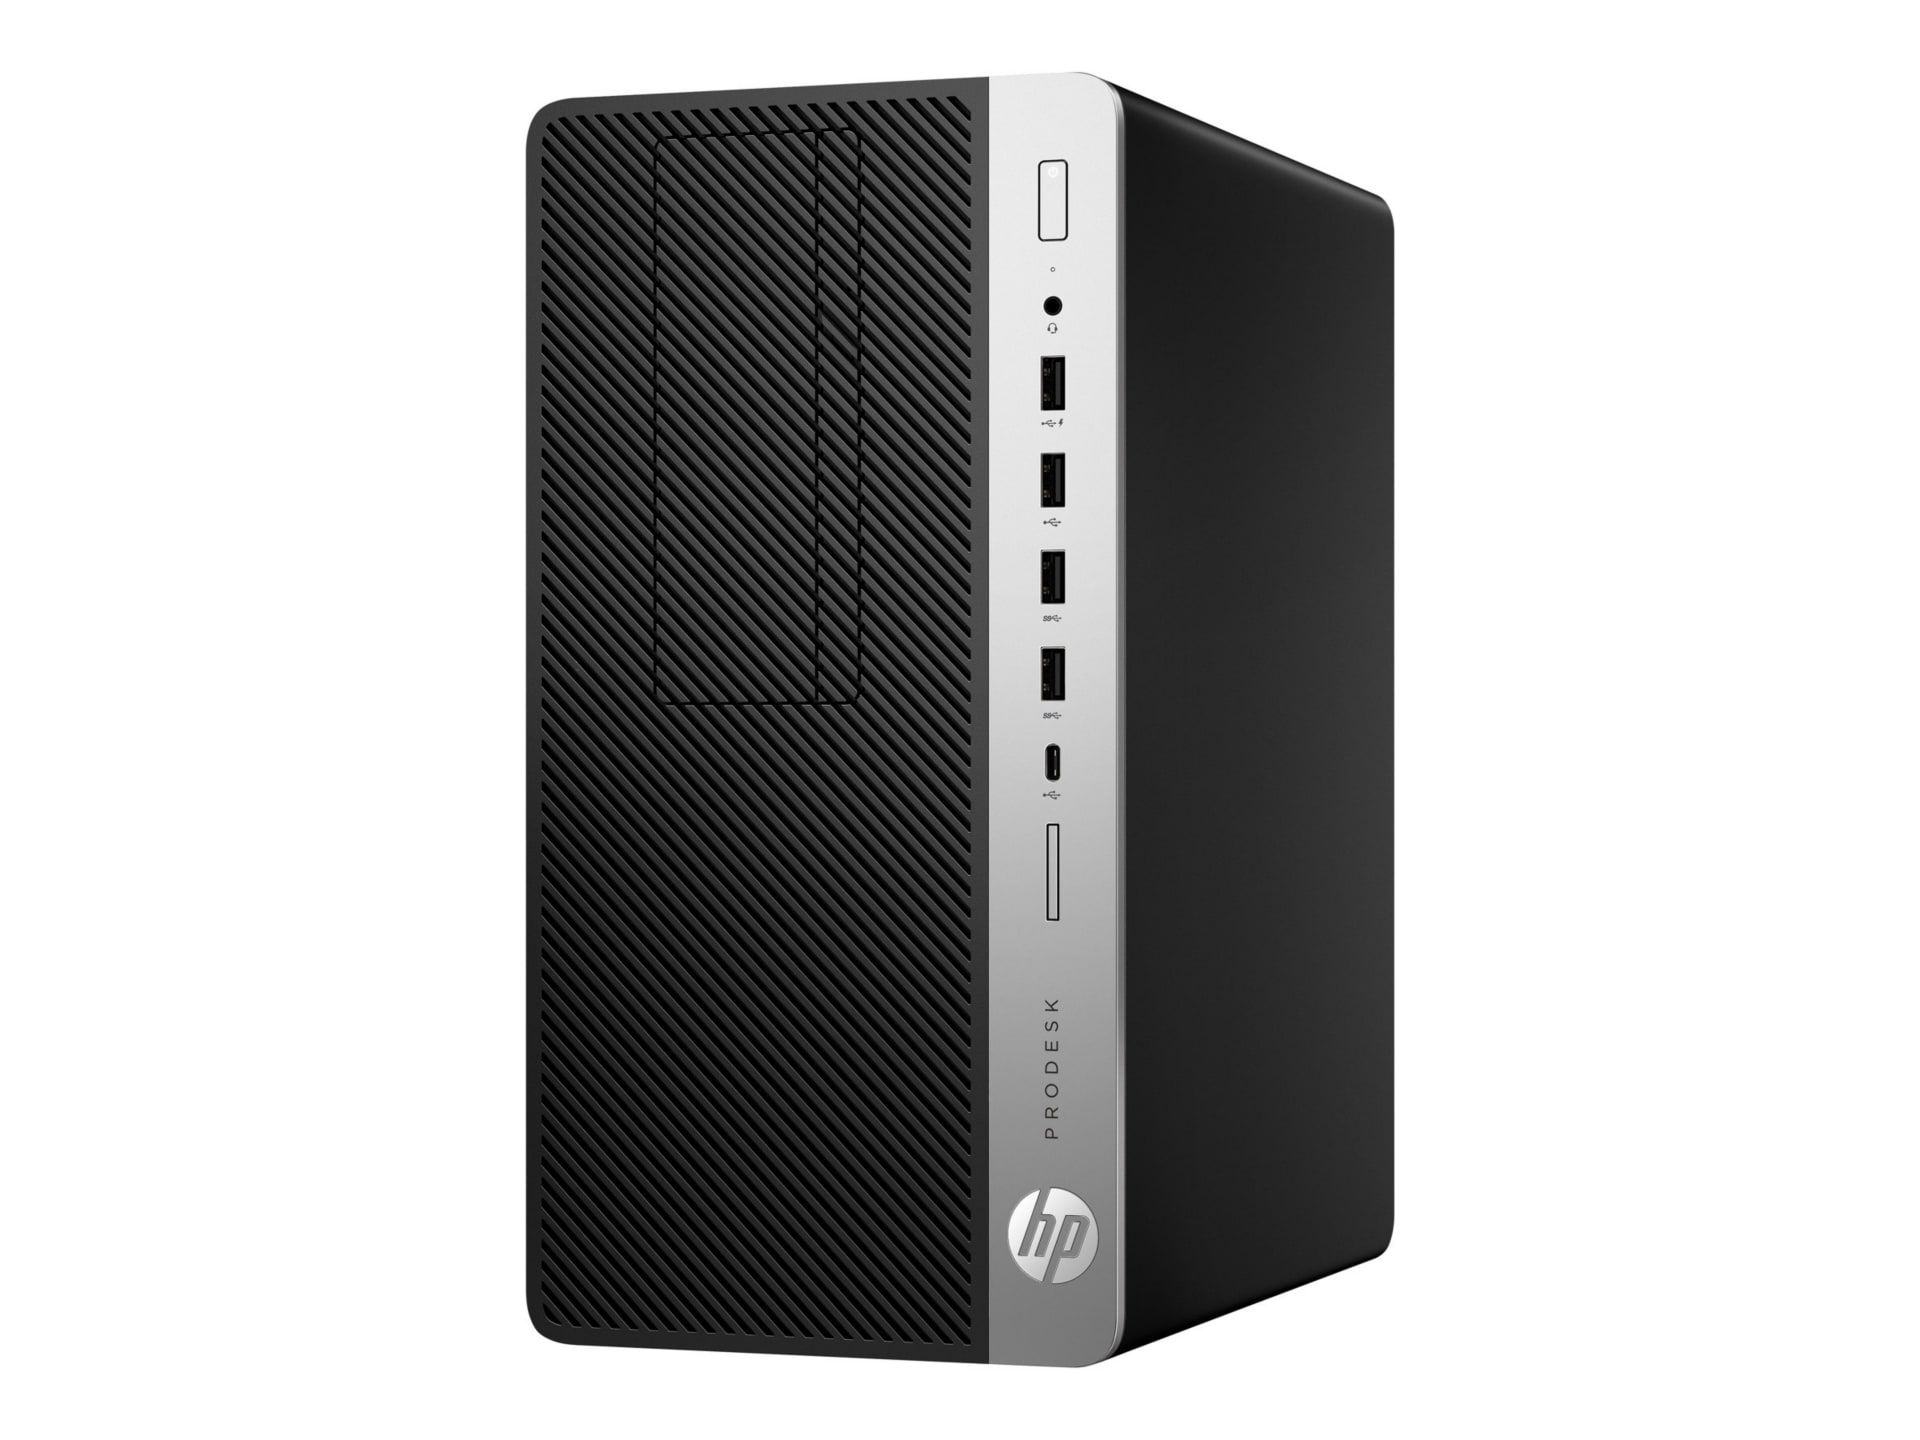 HP ProDesk 600 G3 - micro tower - Core i7 7700 3.6 GHz - 8 GB - 1 TB - US